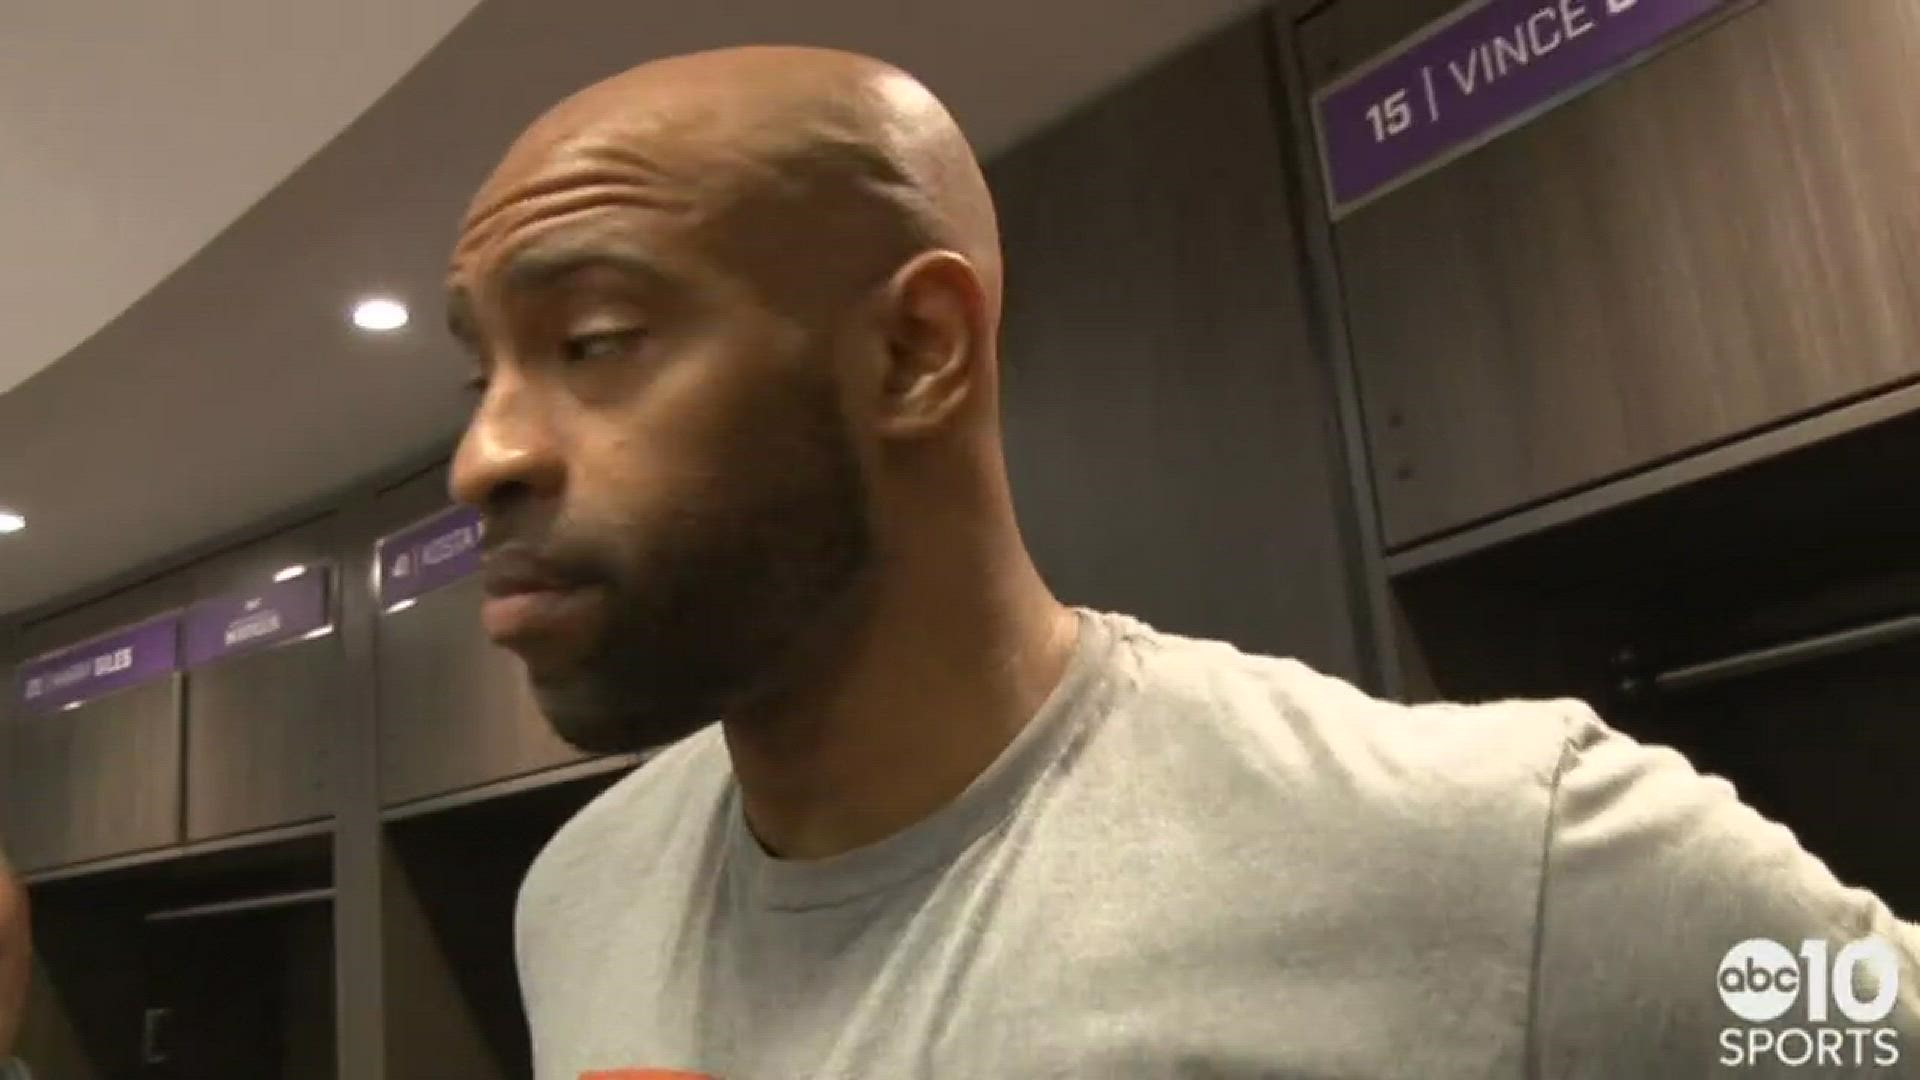 Kings forward Vince Carter talks about his milestone of passing Patrick Ewing on the NBA's All-Time Scoring List for sole possession of 22nd place.